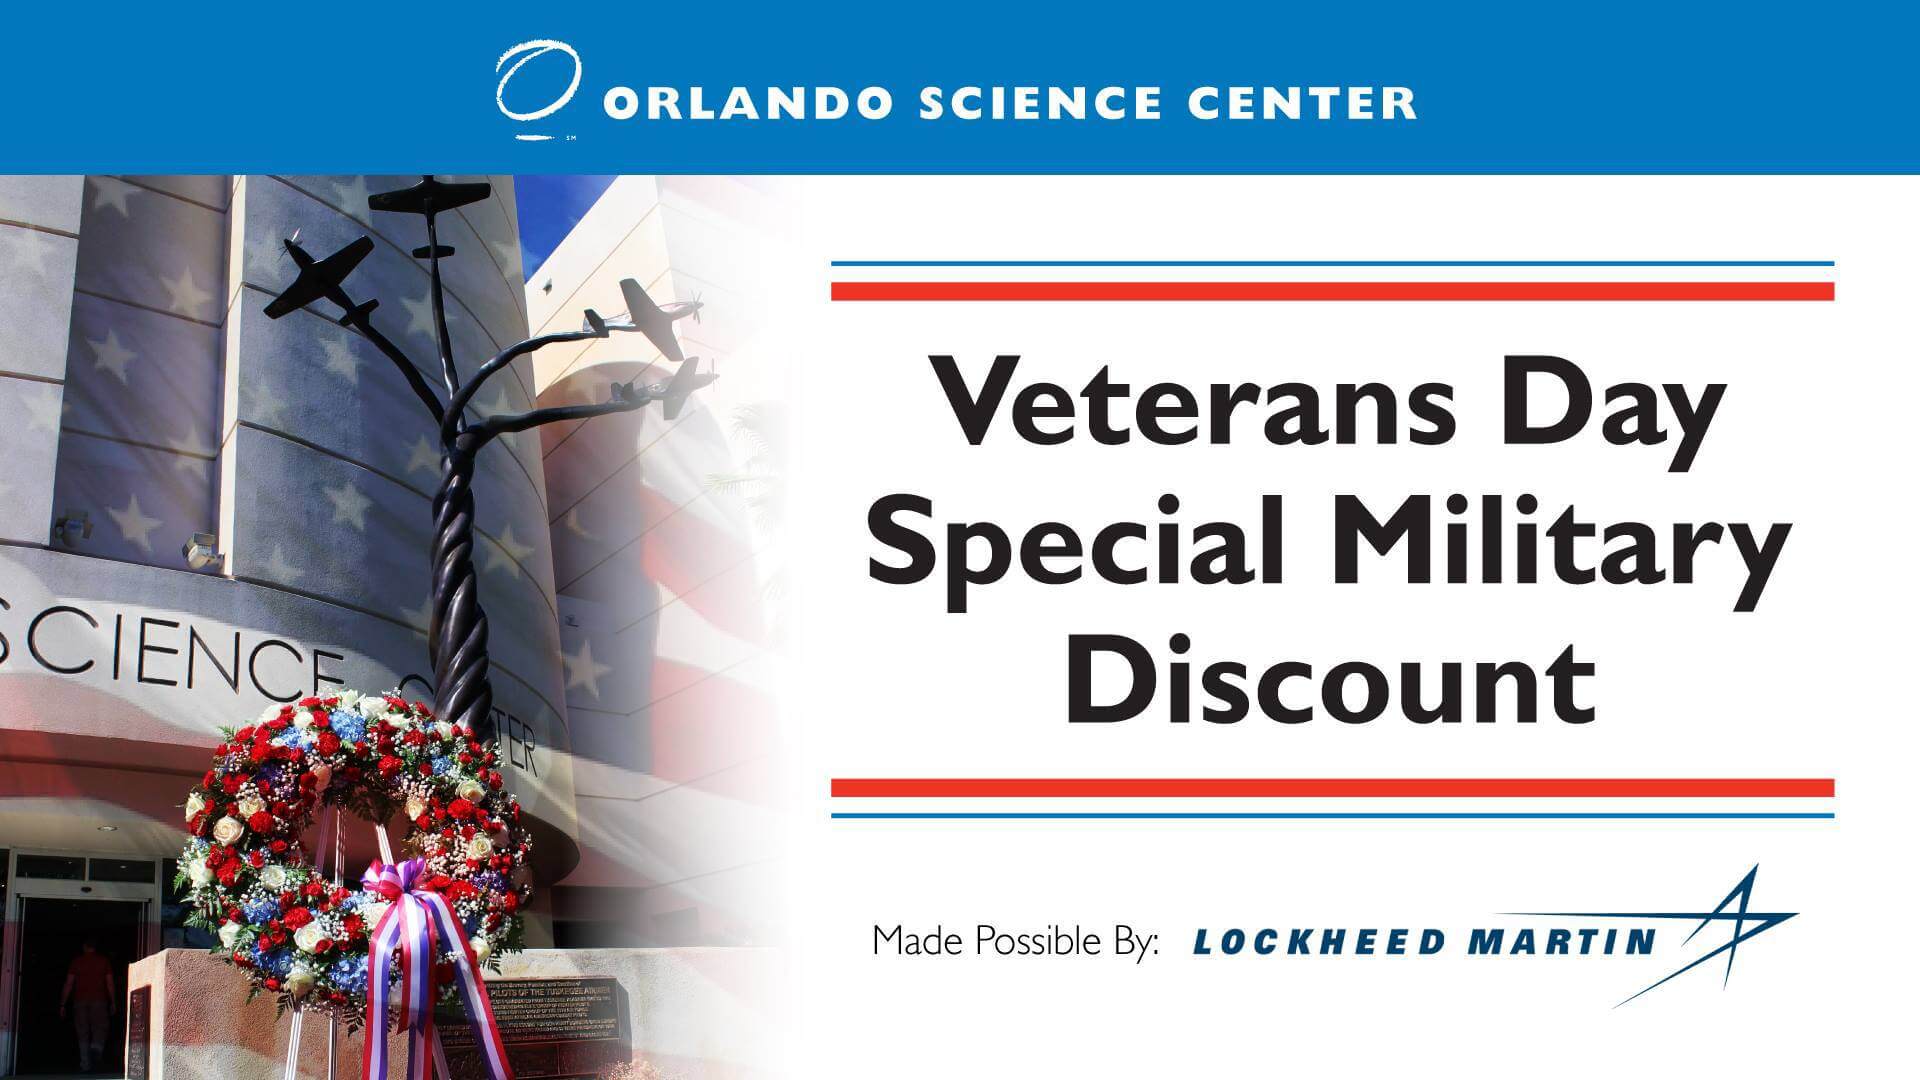 Veterans Day Special Military Discount flyer